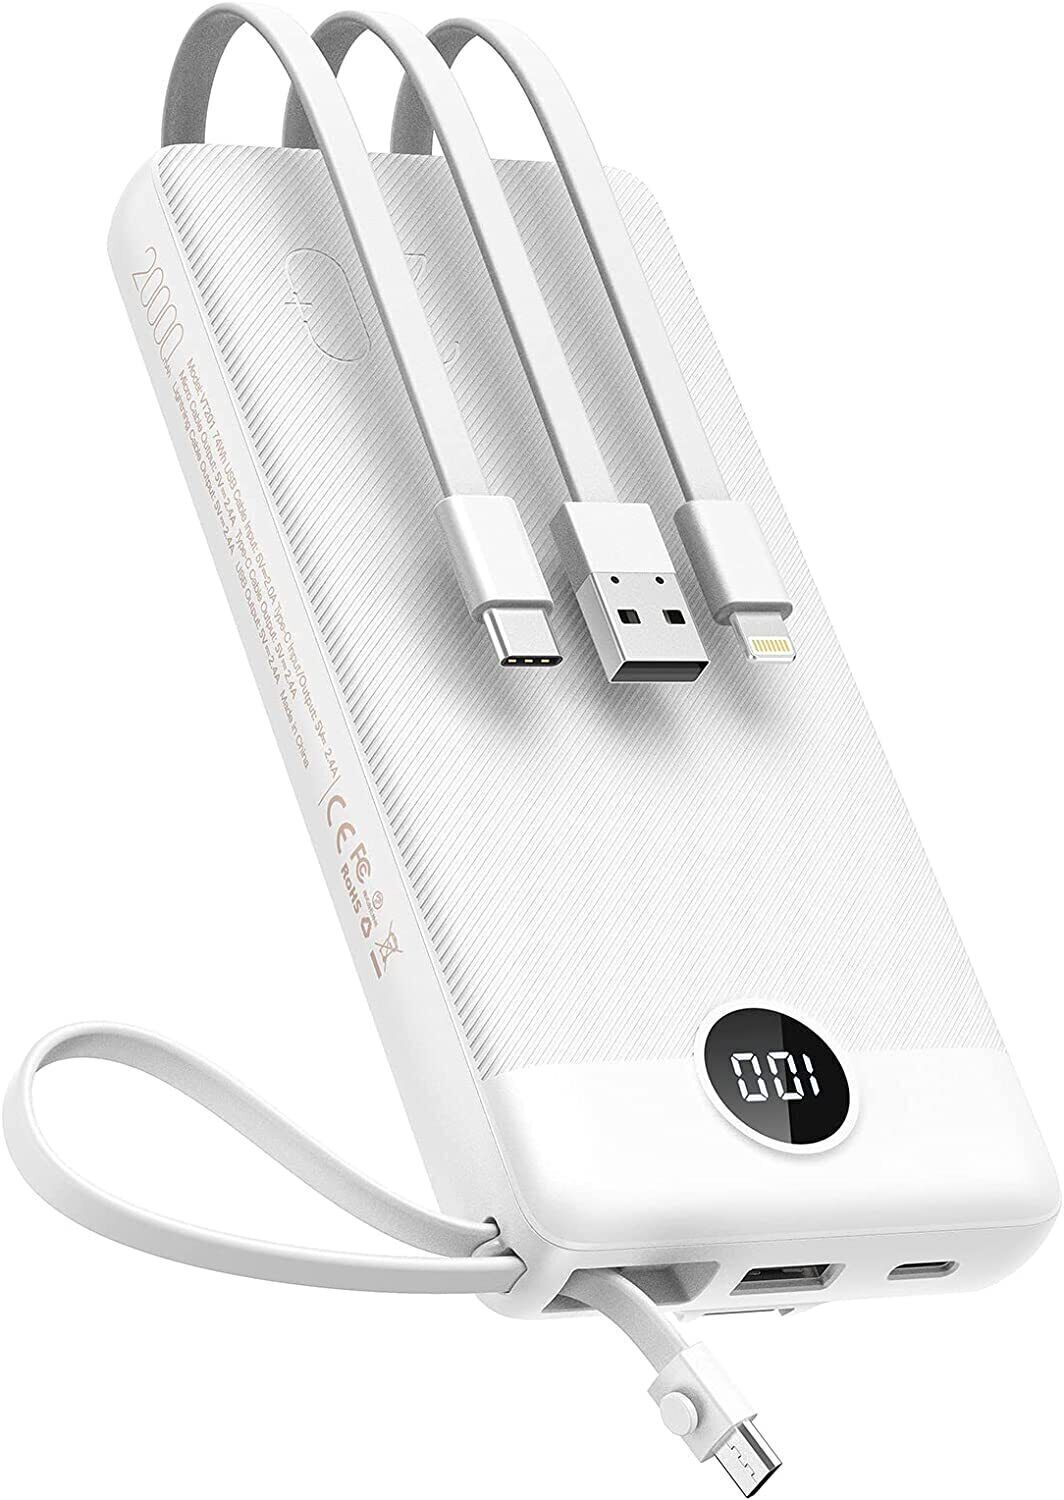 20000mAh USB C Portable Charger with 5 Outputs & 2 Inputs Plus LED Power Display - RLO Tech